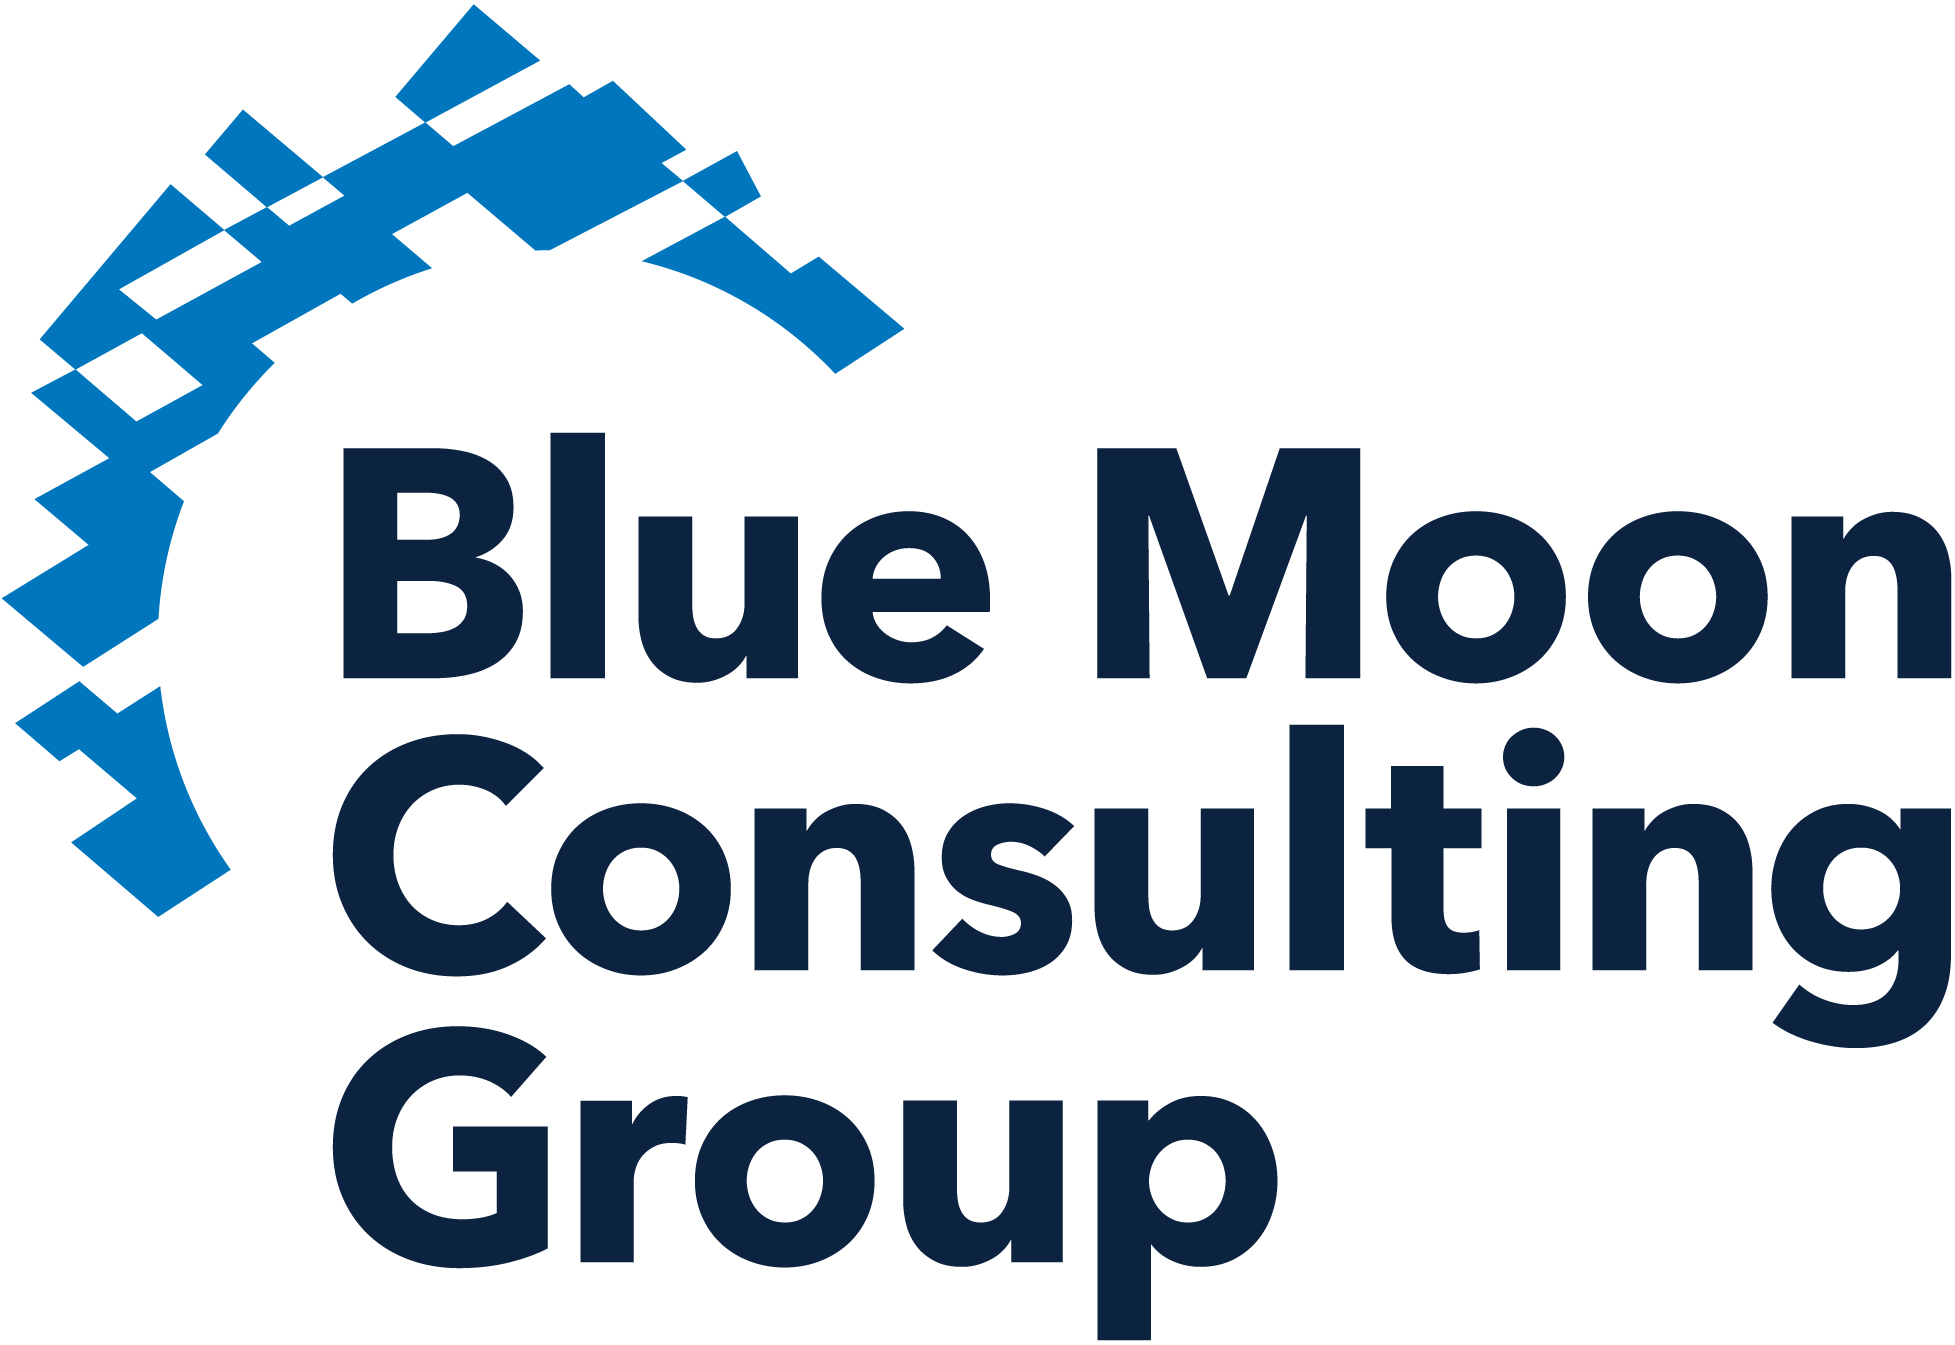 Blue Moon Consulting Group Logo